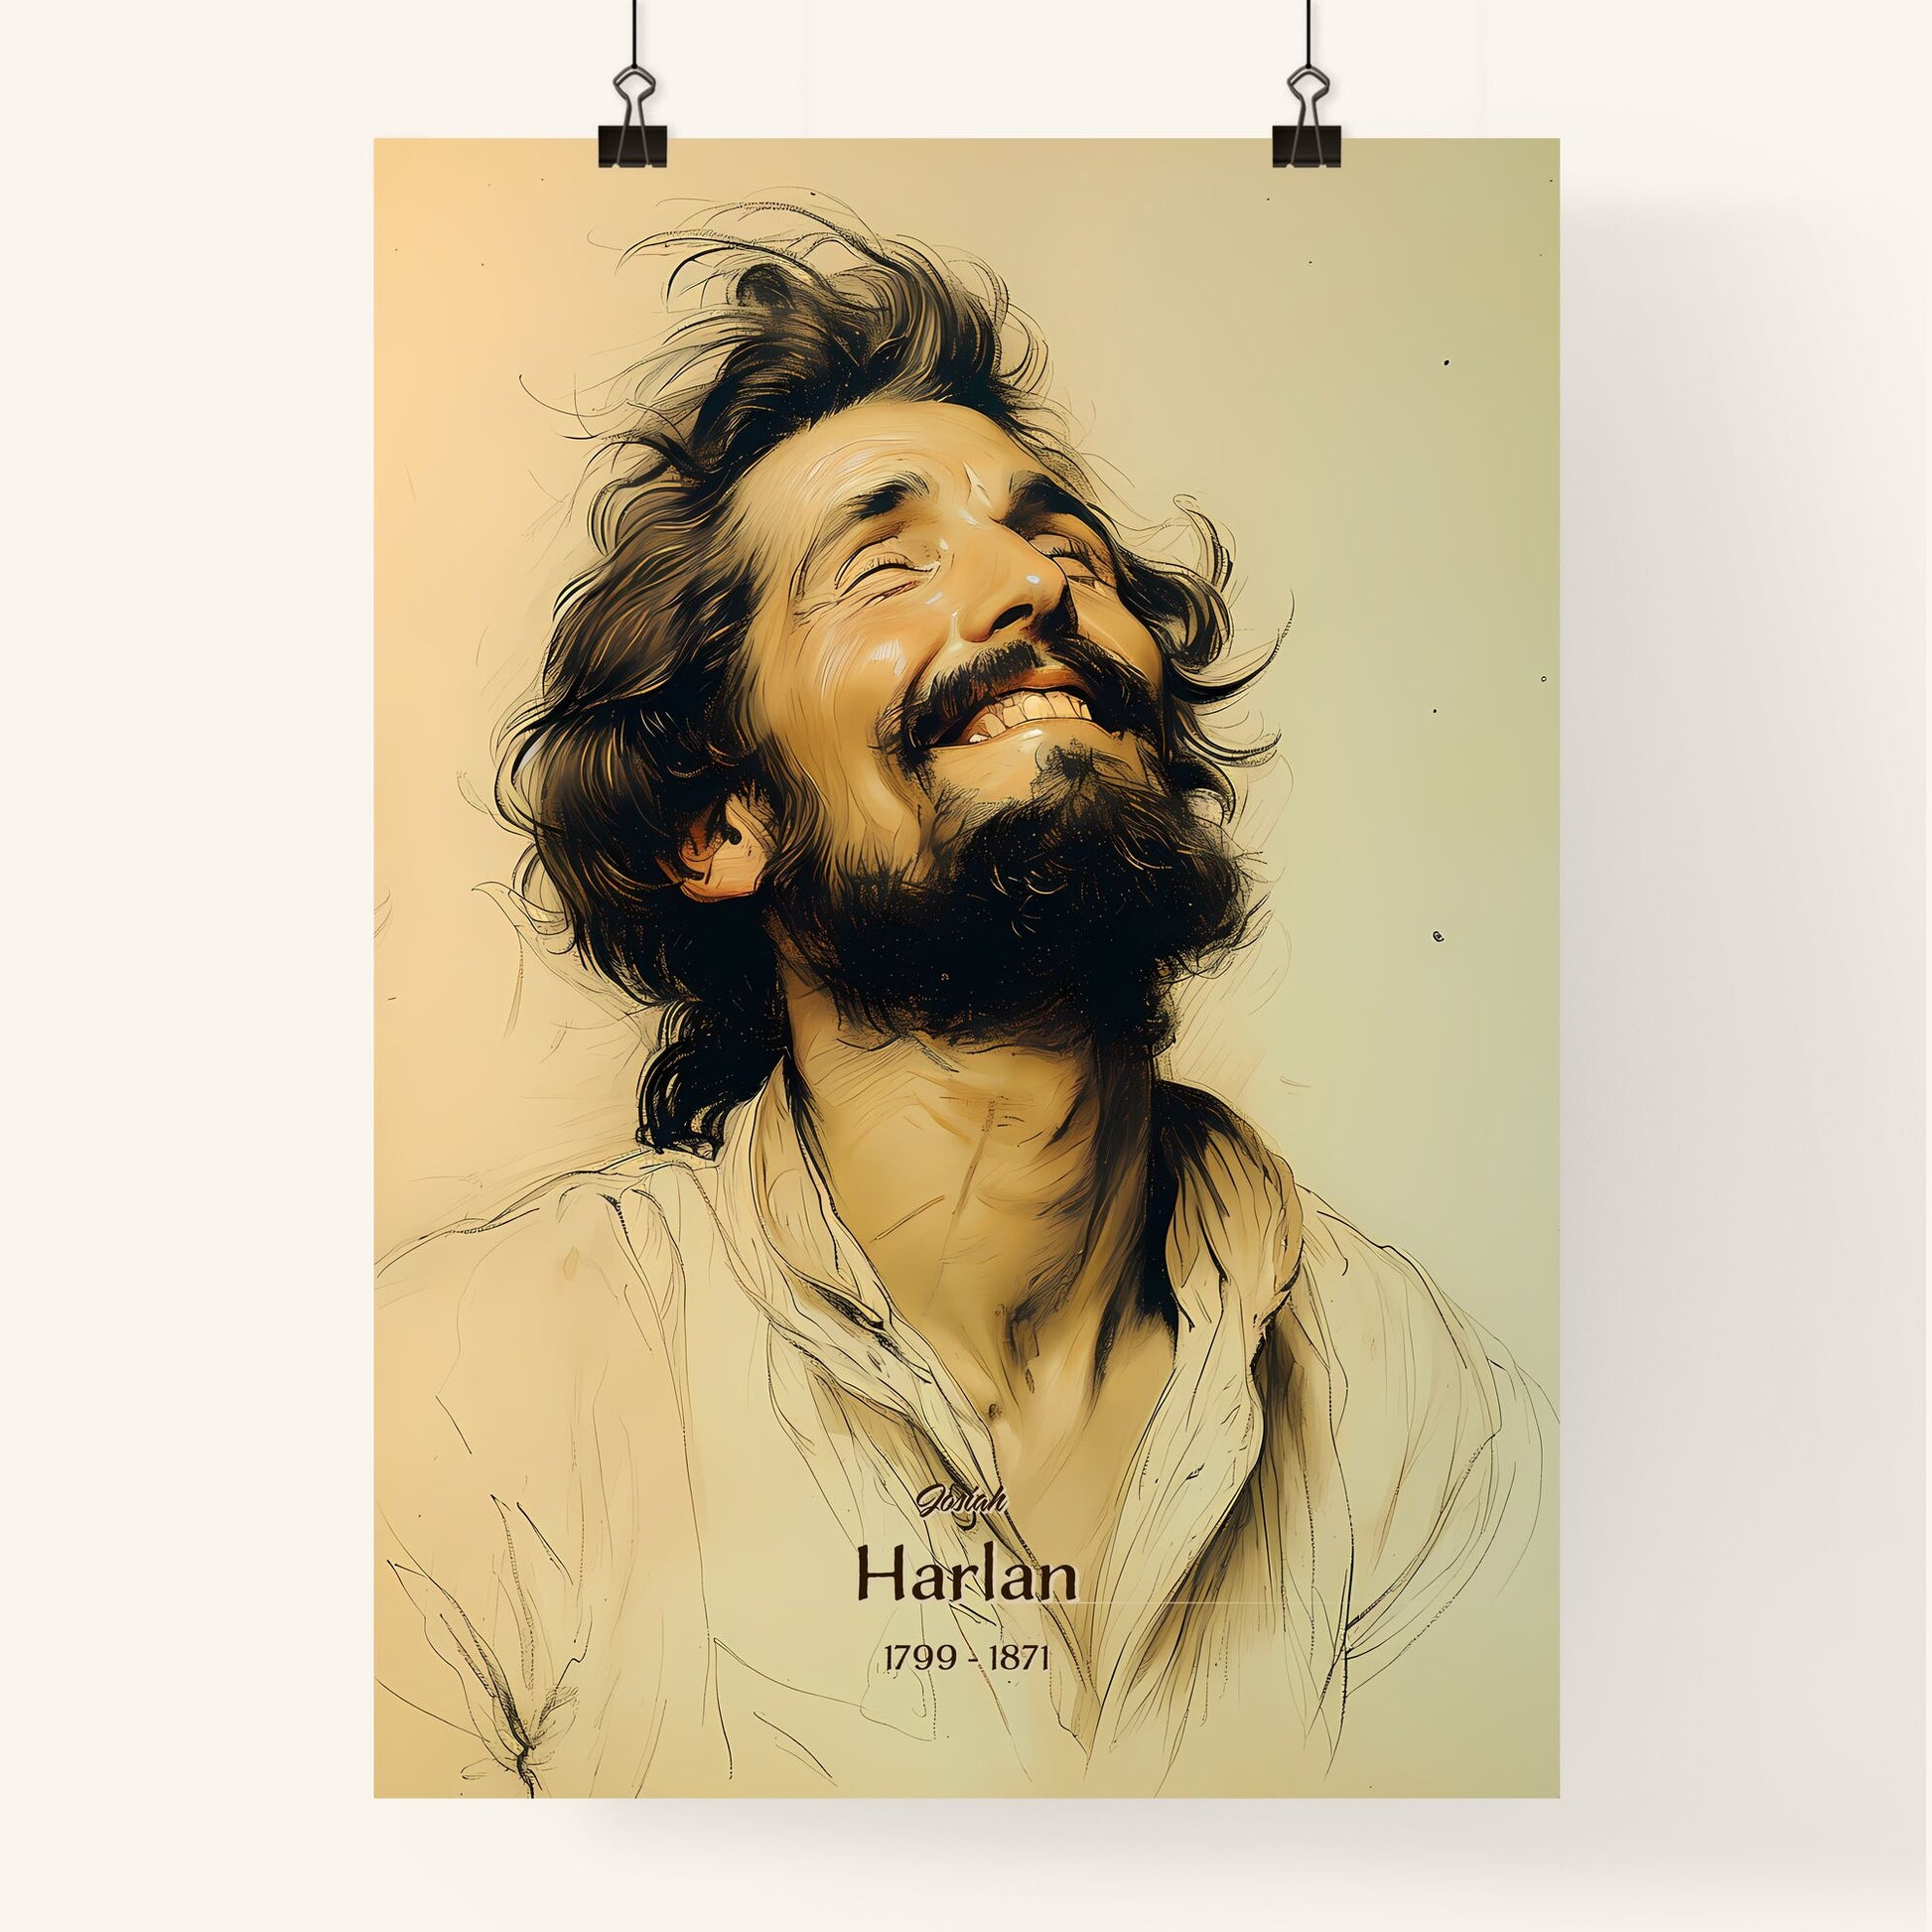 Josiah, Harlan, 1799 - 1871, A Poster of a man with long hair and beard smiling Default Title